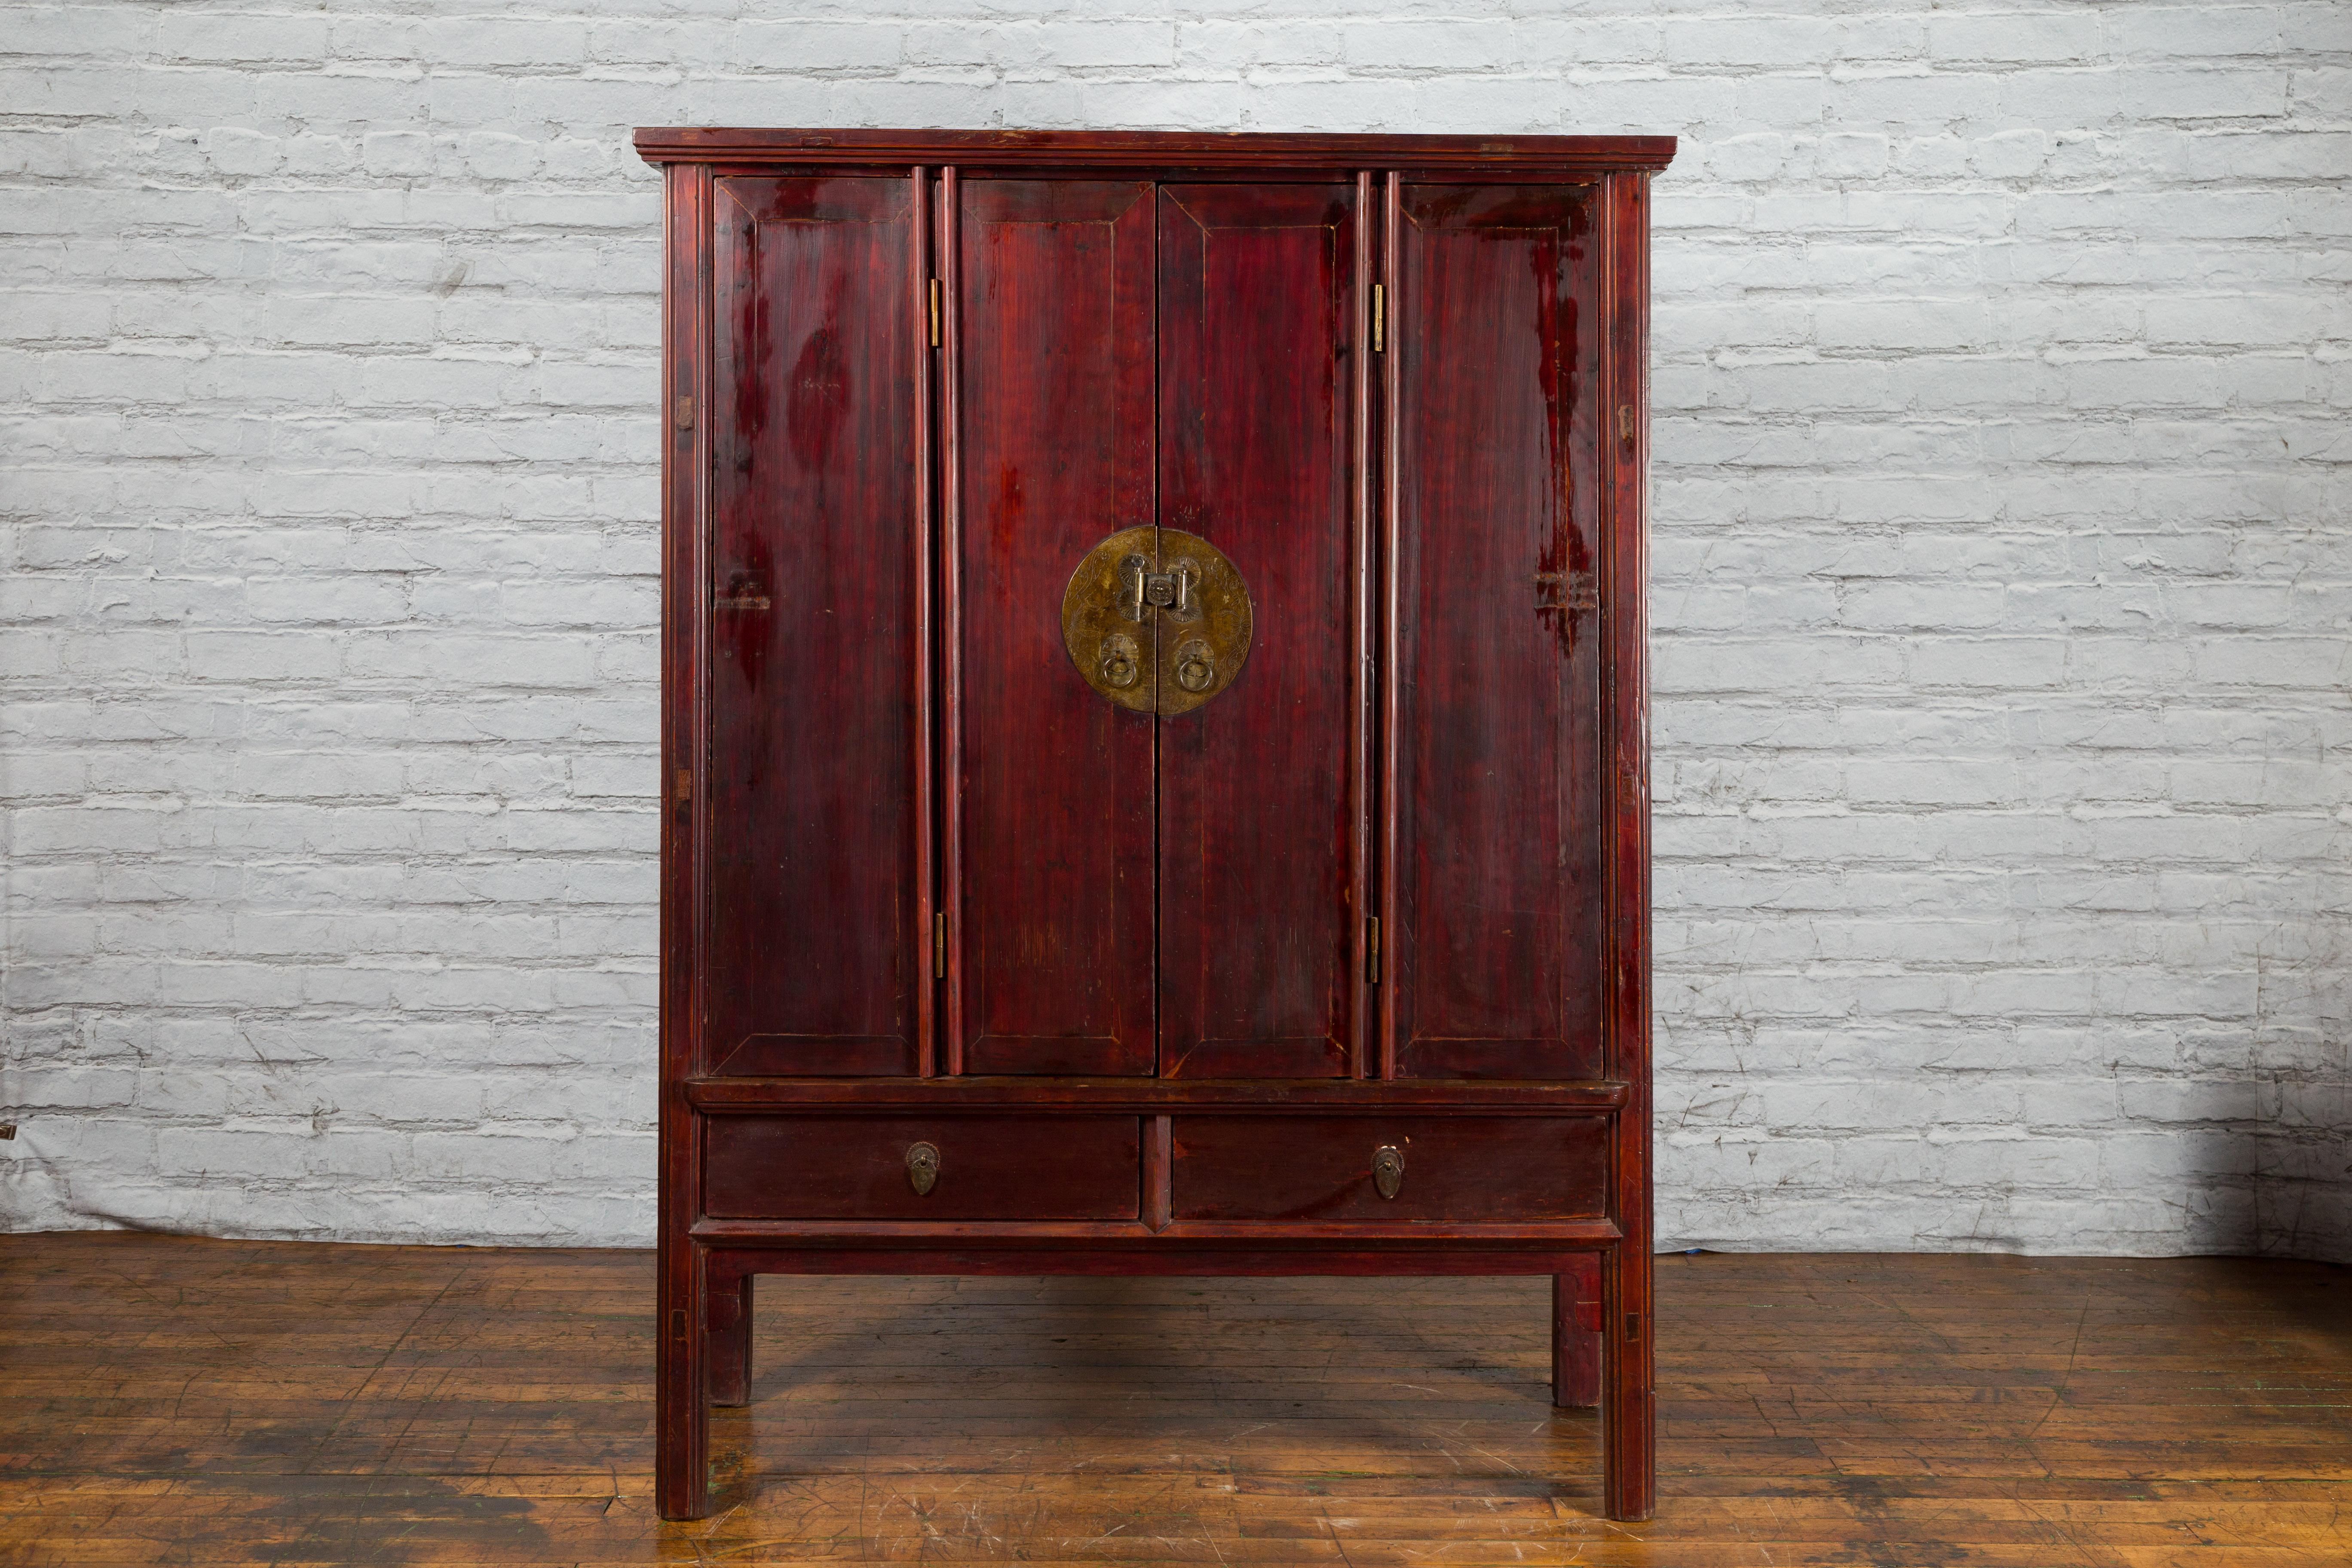 A large Chinese Qing Dynasty period cabinet from the 19th century with accordion doors and drawers. Created in China during the Qing Dynasty, this lacquered cabinet features a tapering silhouette complimented by a dark reddish brown finish. The